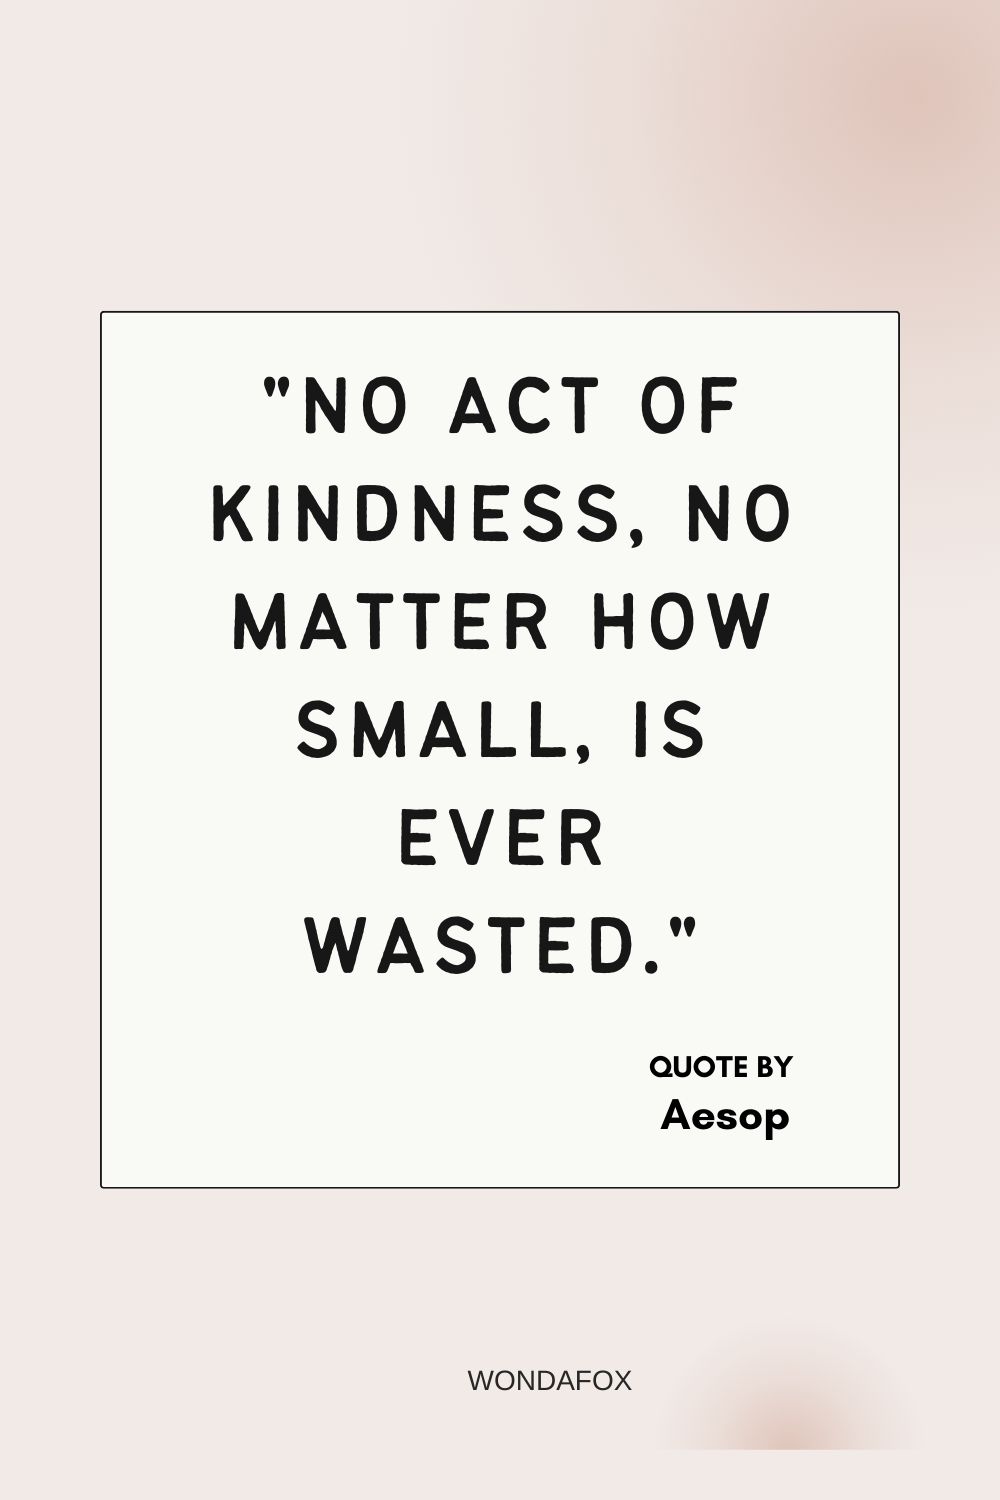 "No act of kindness, no matter how small, is ever wasted."
Aesop